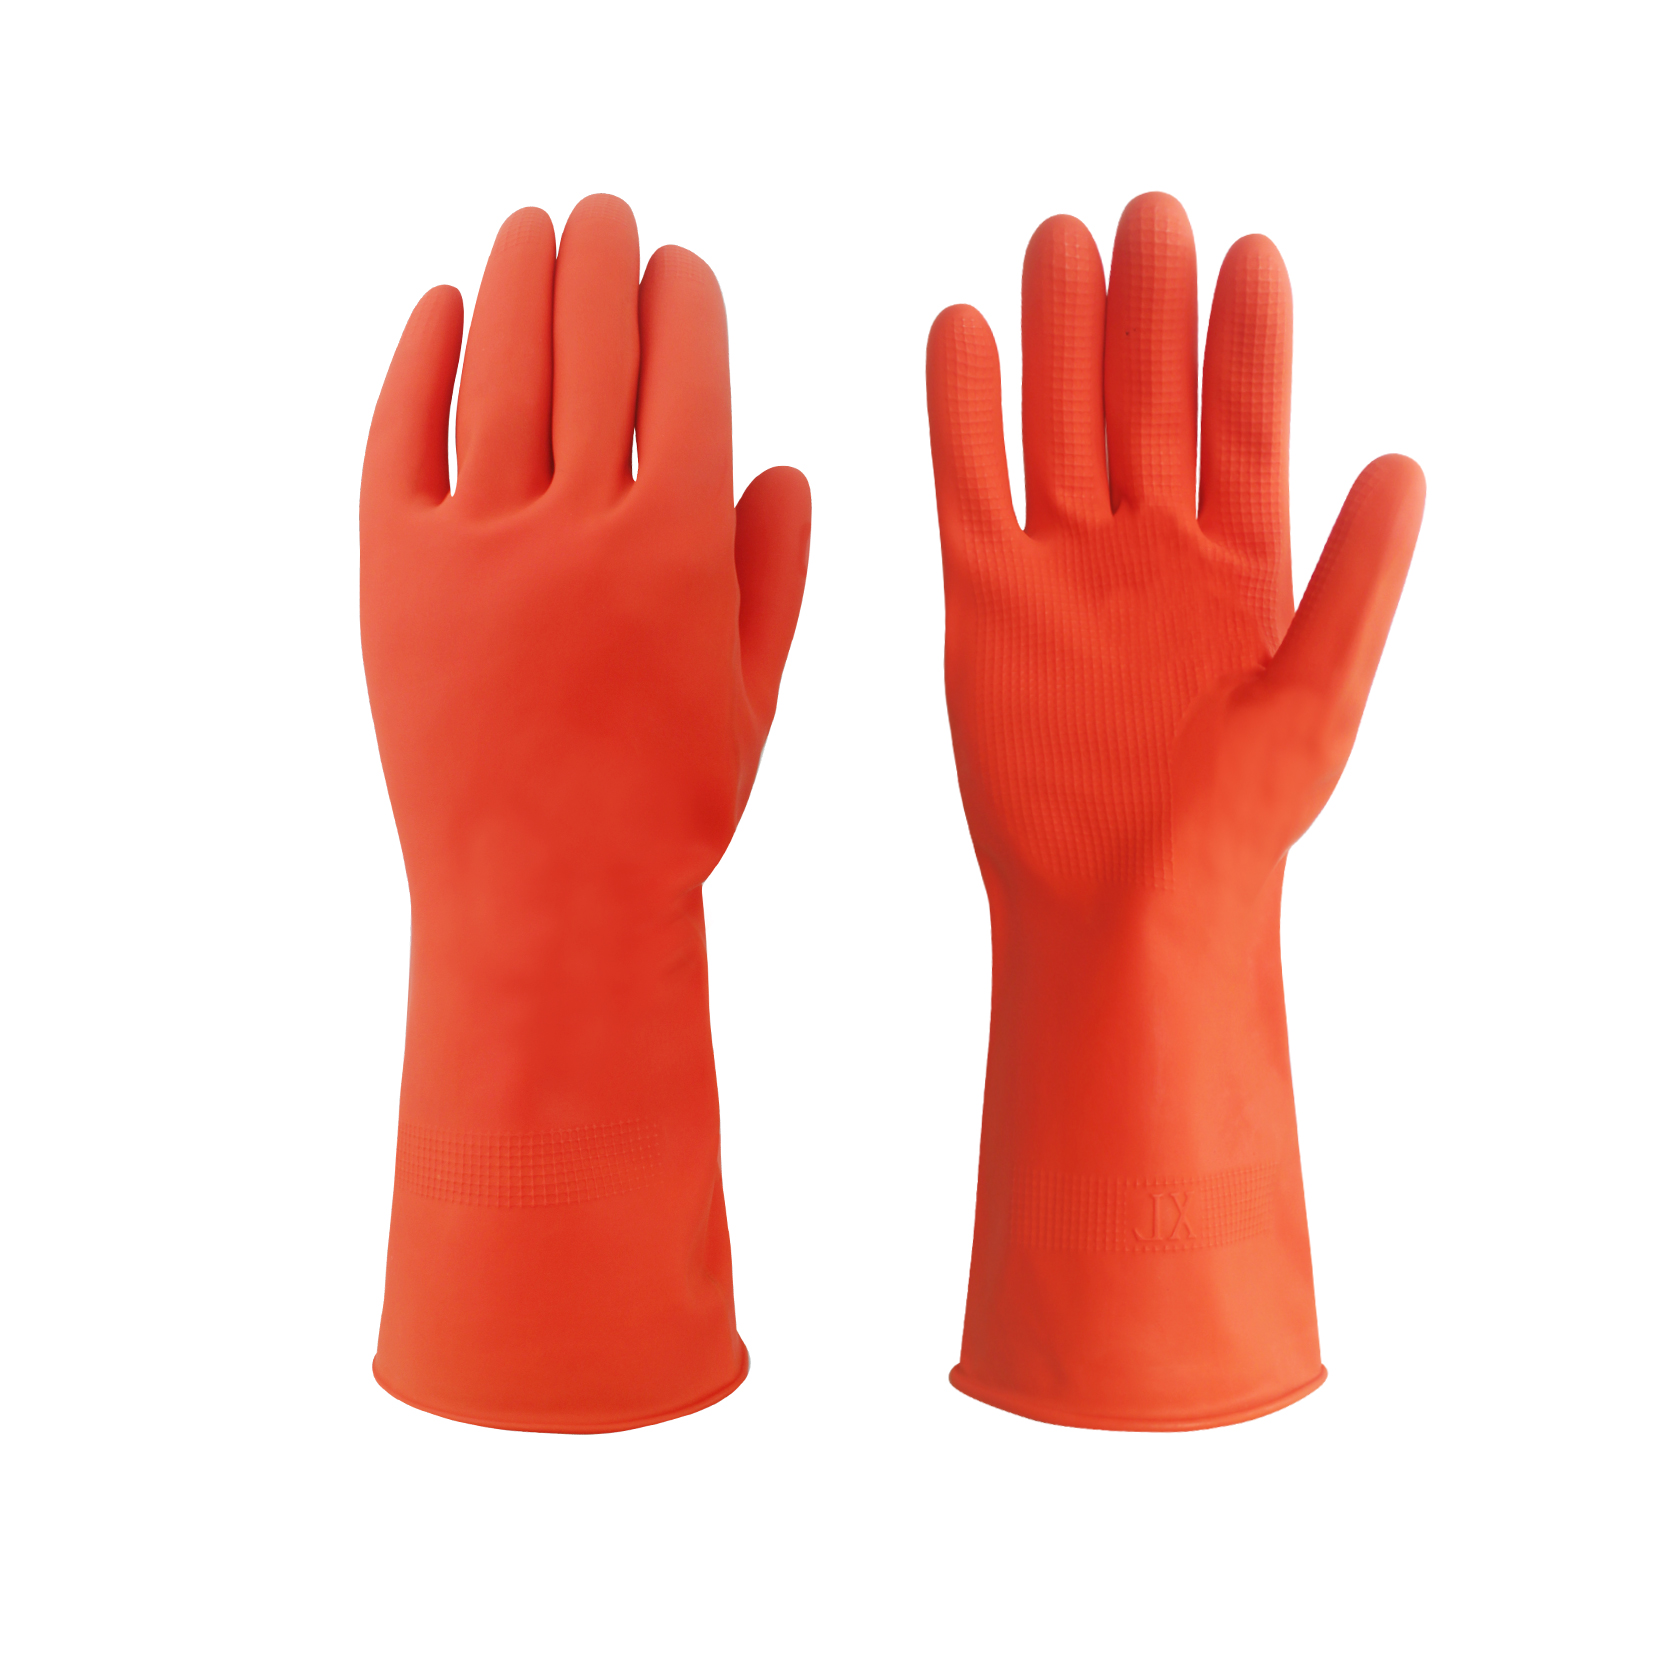 OEM Flock-Lining Household Rubber Gloves Orange Hand Latex Safety Work Gloves for Dishwashing Cleaning Featured Image